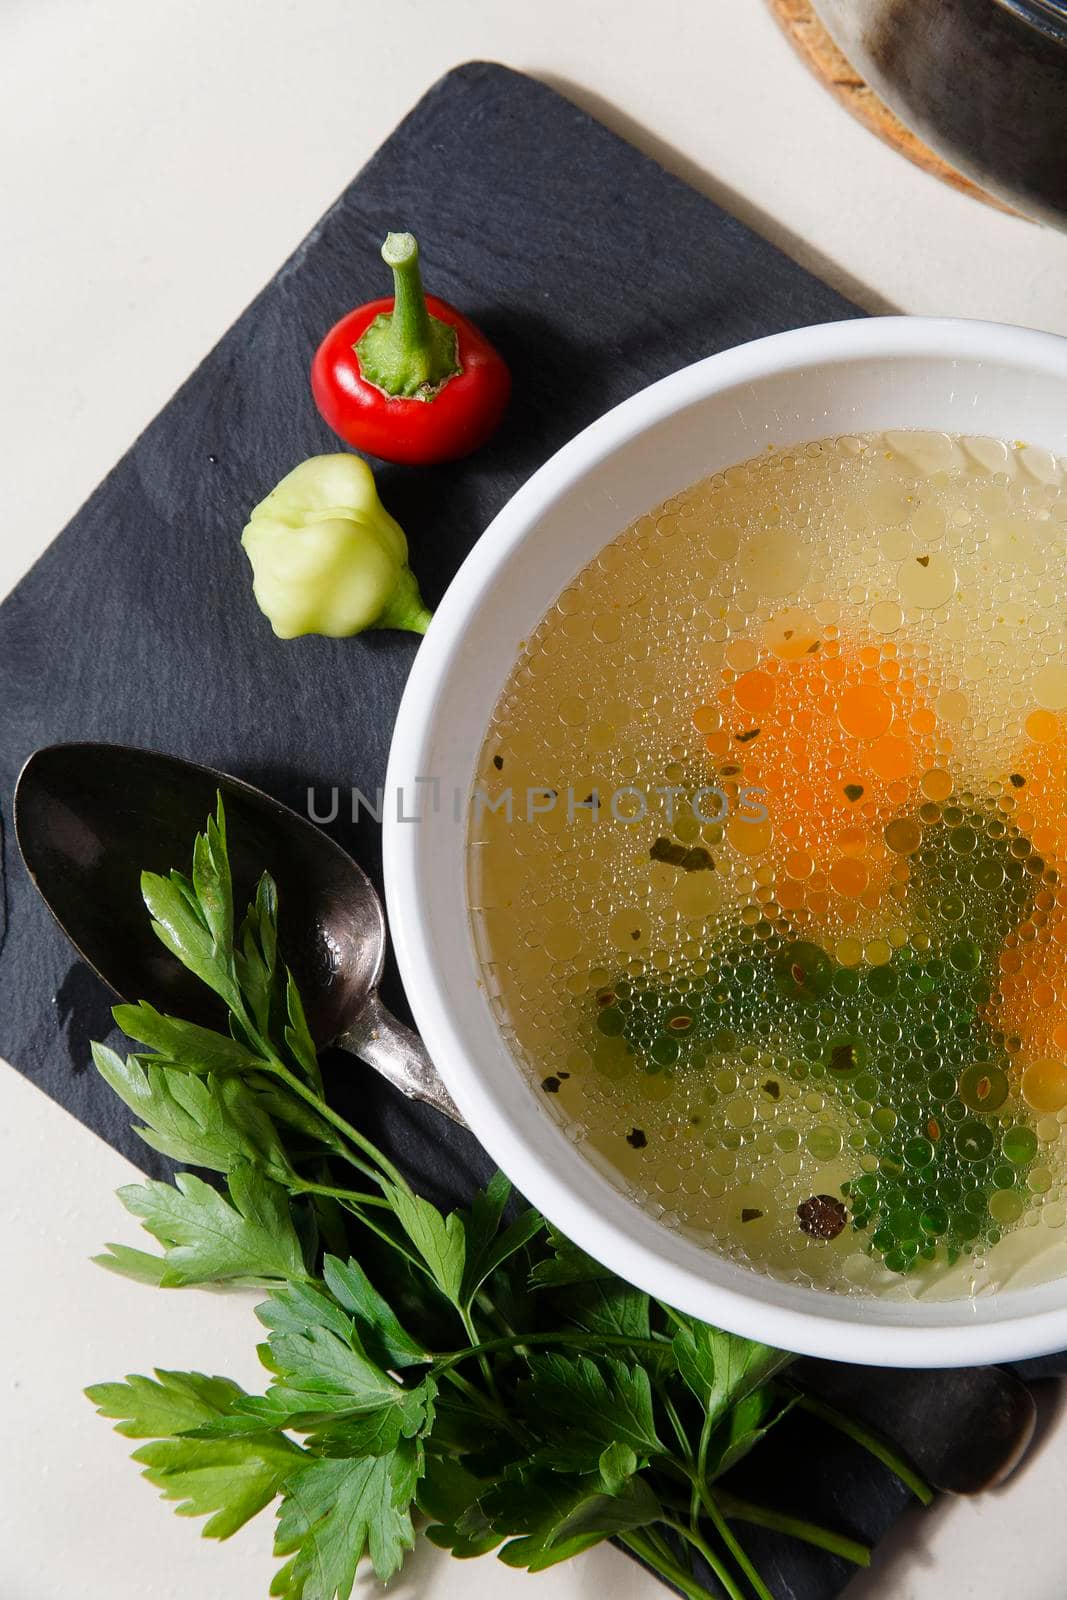 A bowl with fresh home made chiken broth with carrot, parsley and red chili pepper on black cutting board on white table, top view, close up.